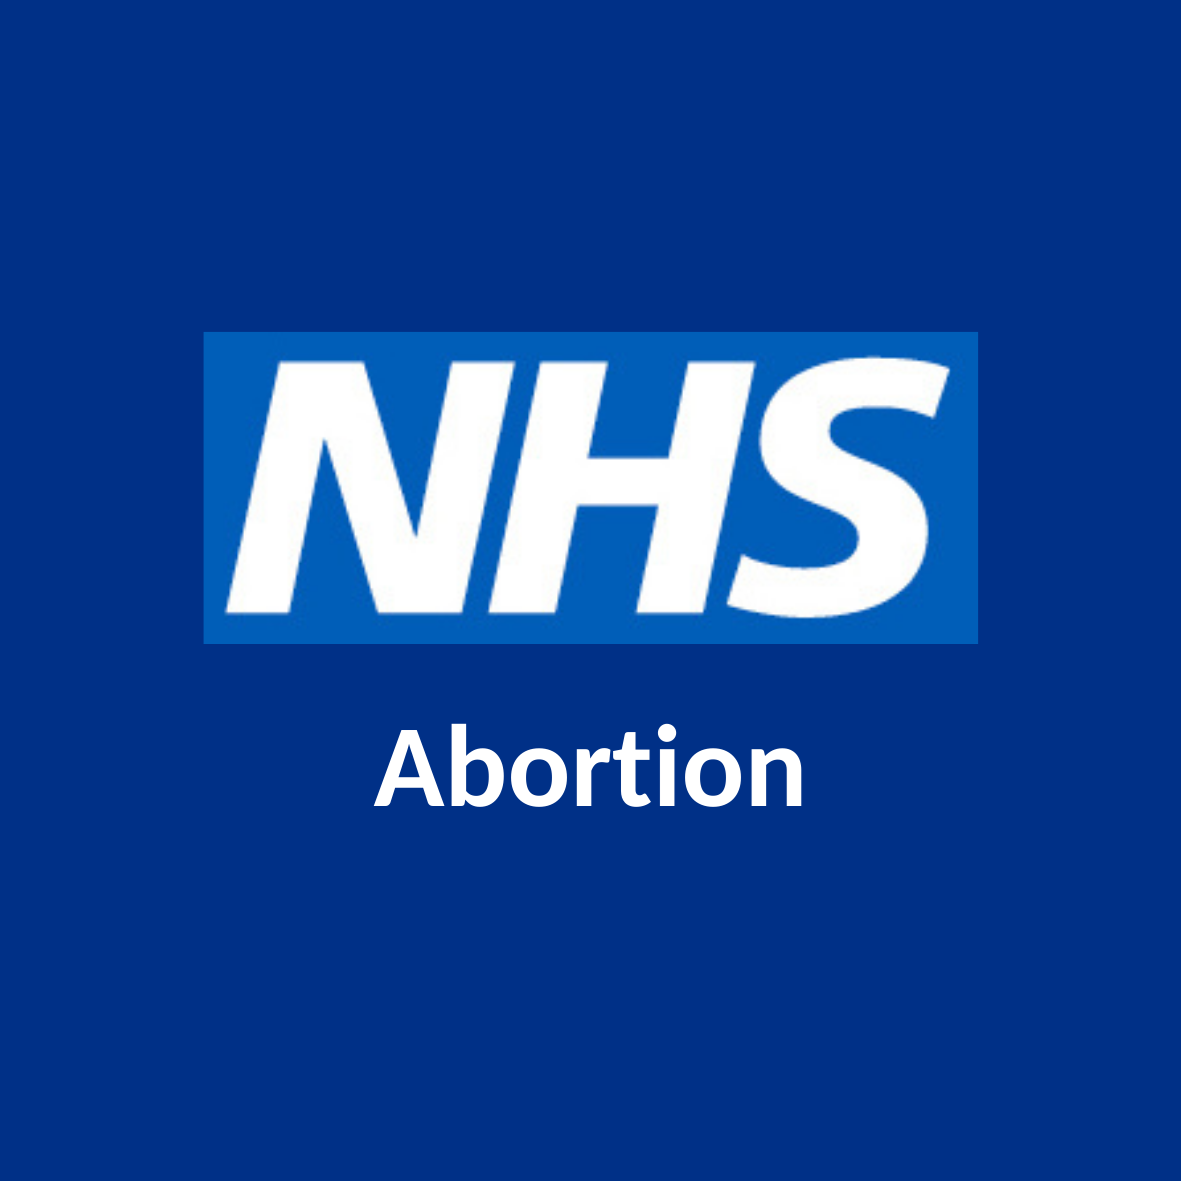 NHS Logo With Word 'Abortion'